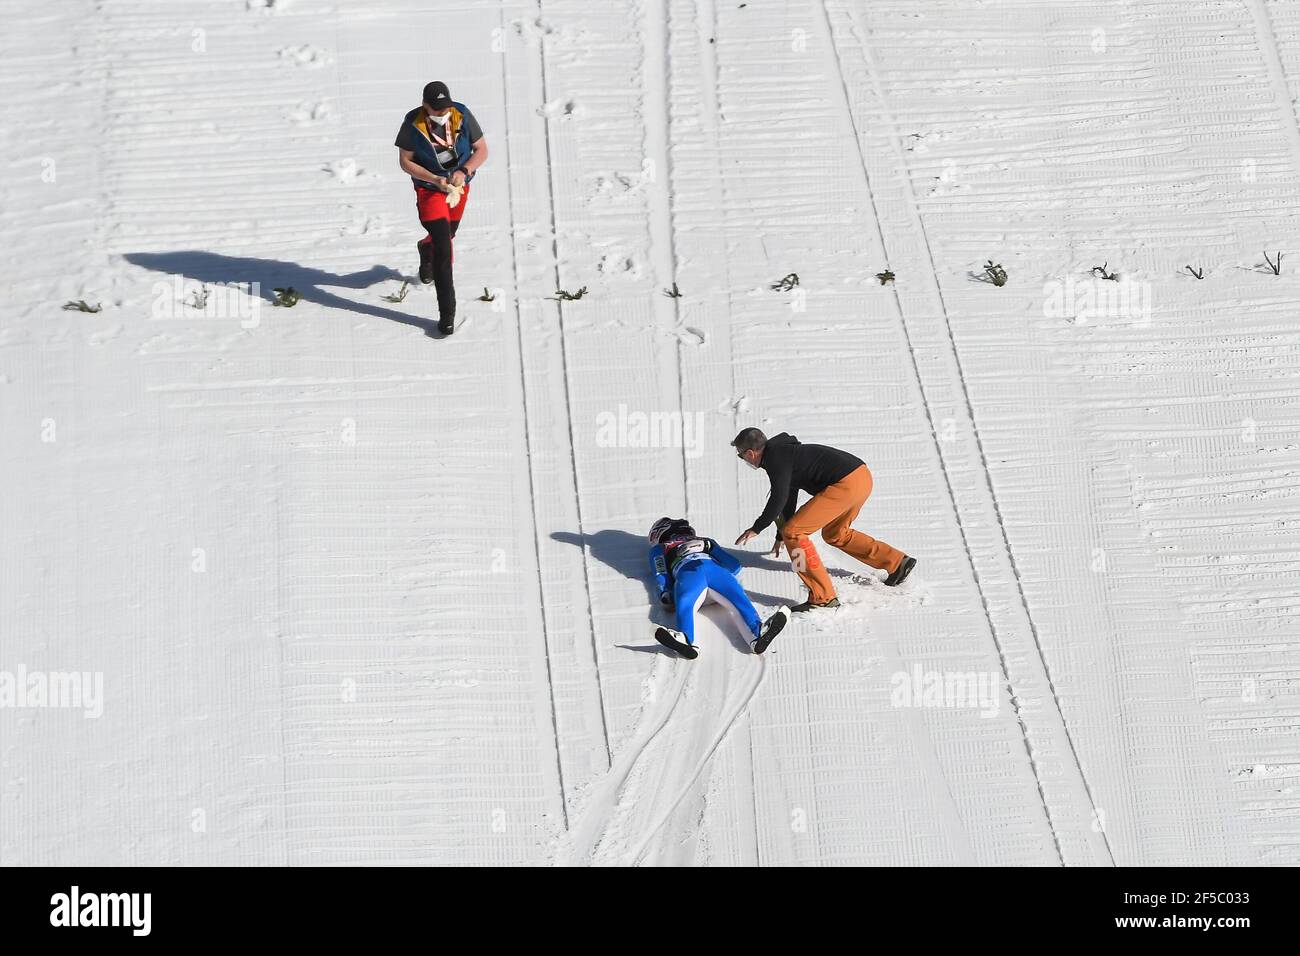 Medical staff provide assistance to Daniel Andre Tande of Norway after he crashes during the FIS Ski Jumping World Cup Flying Hill Individual competition in Planica. Stock Photo